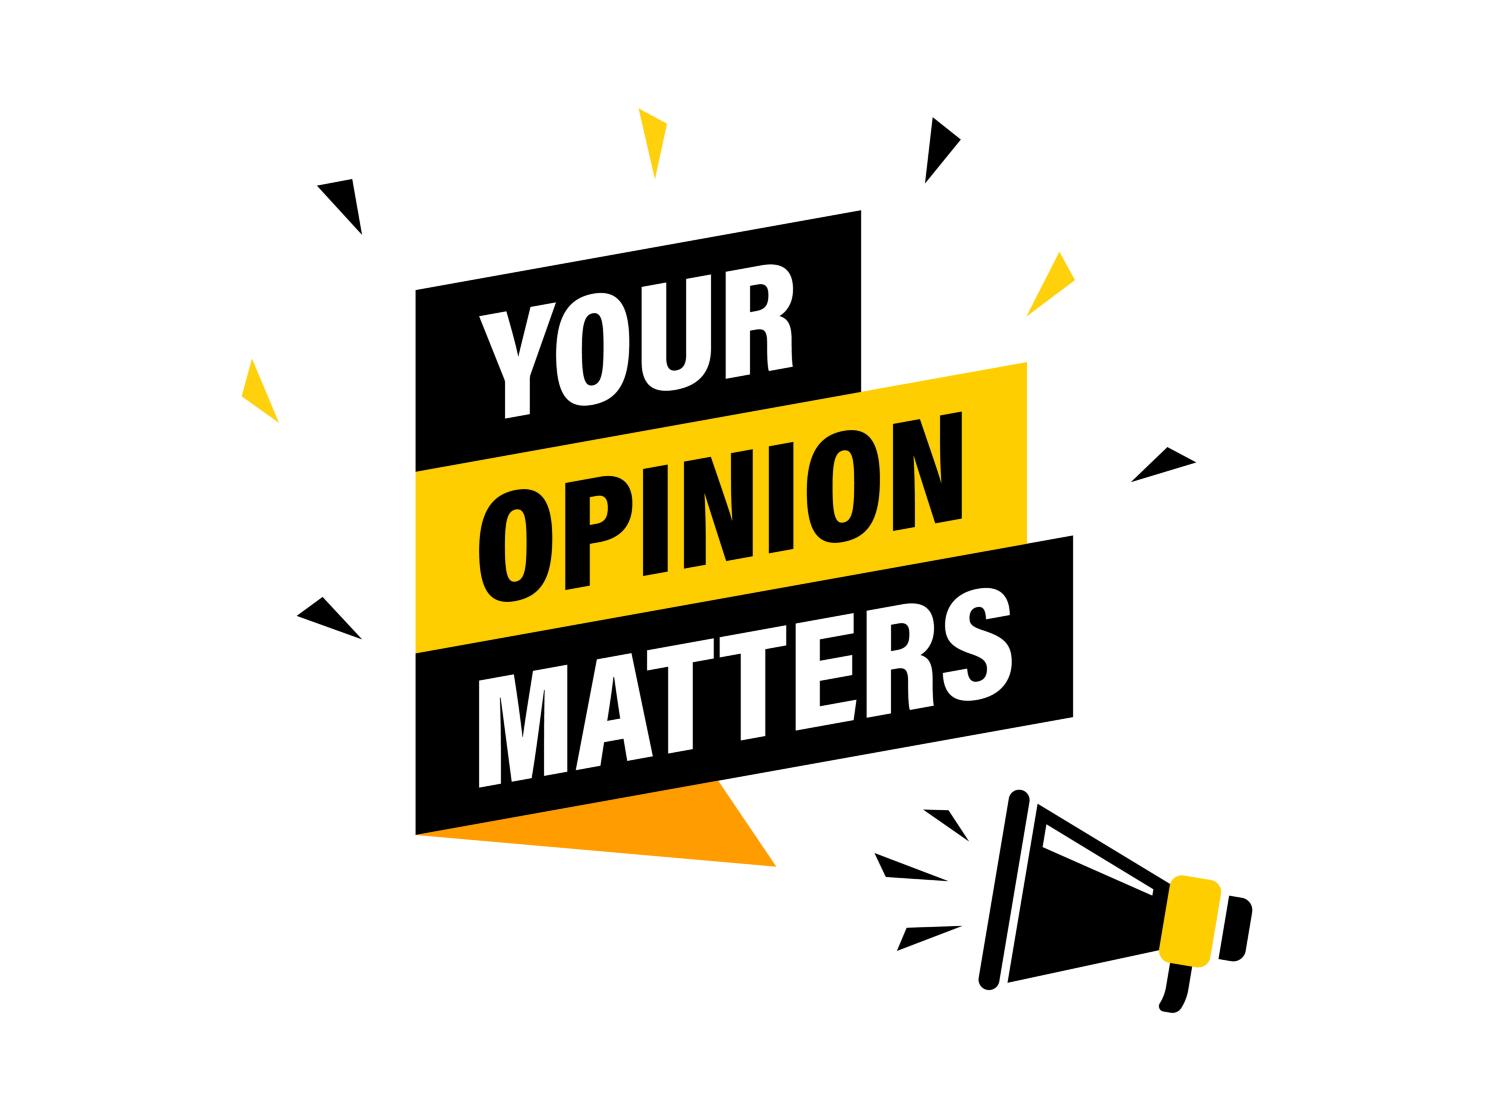 Your opinion matters word art